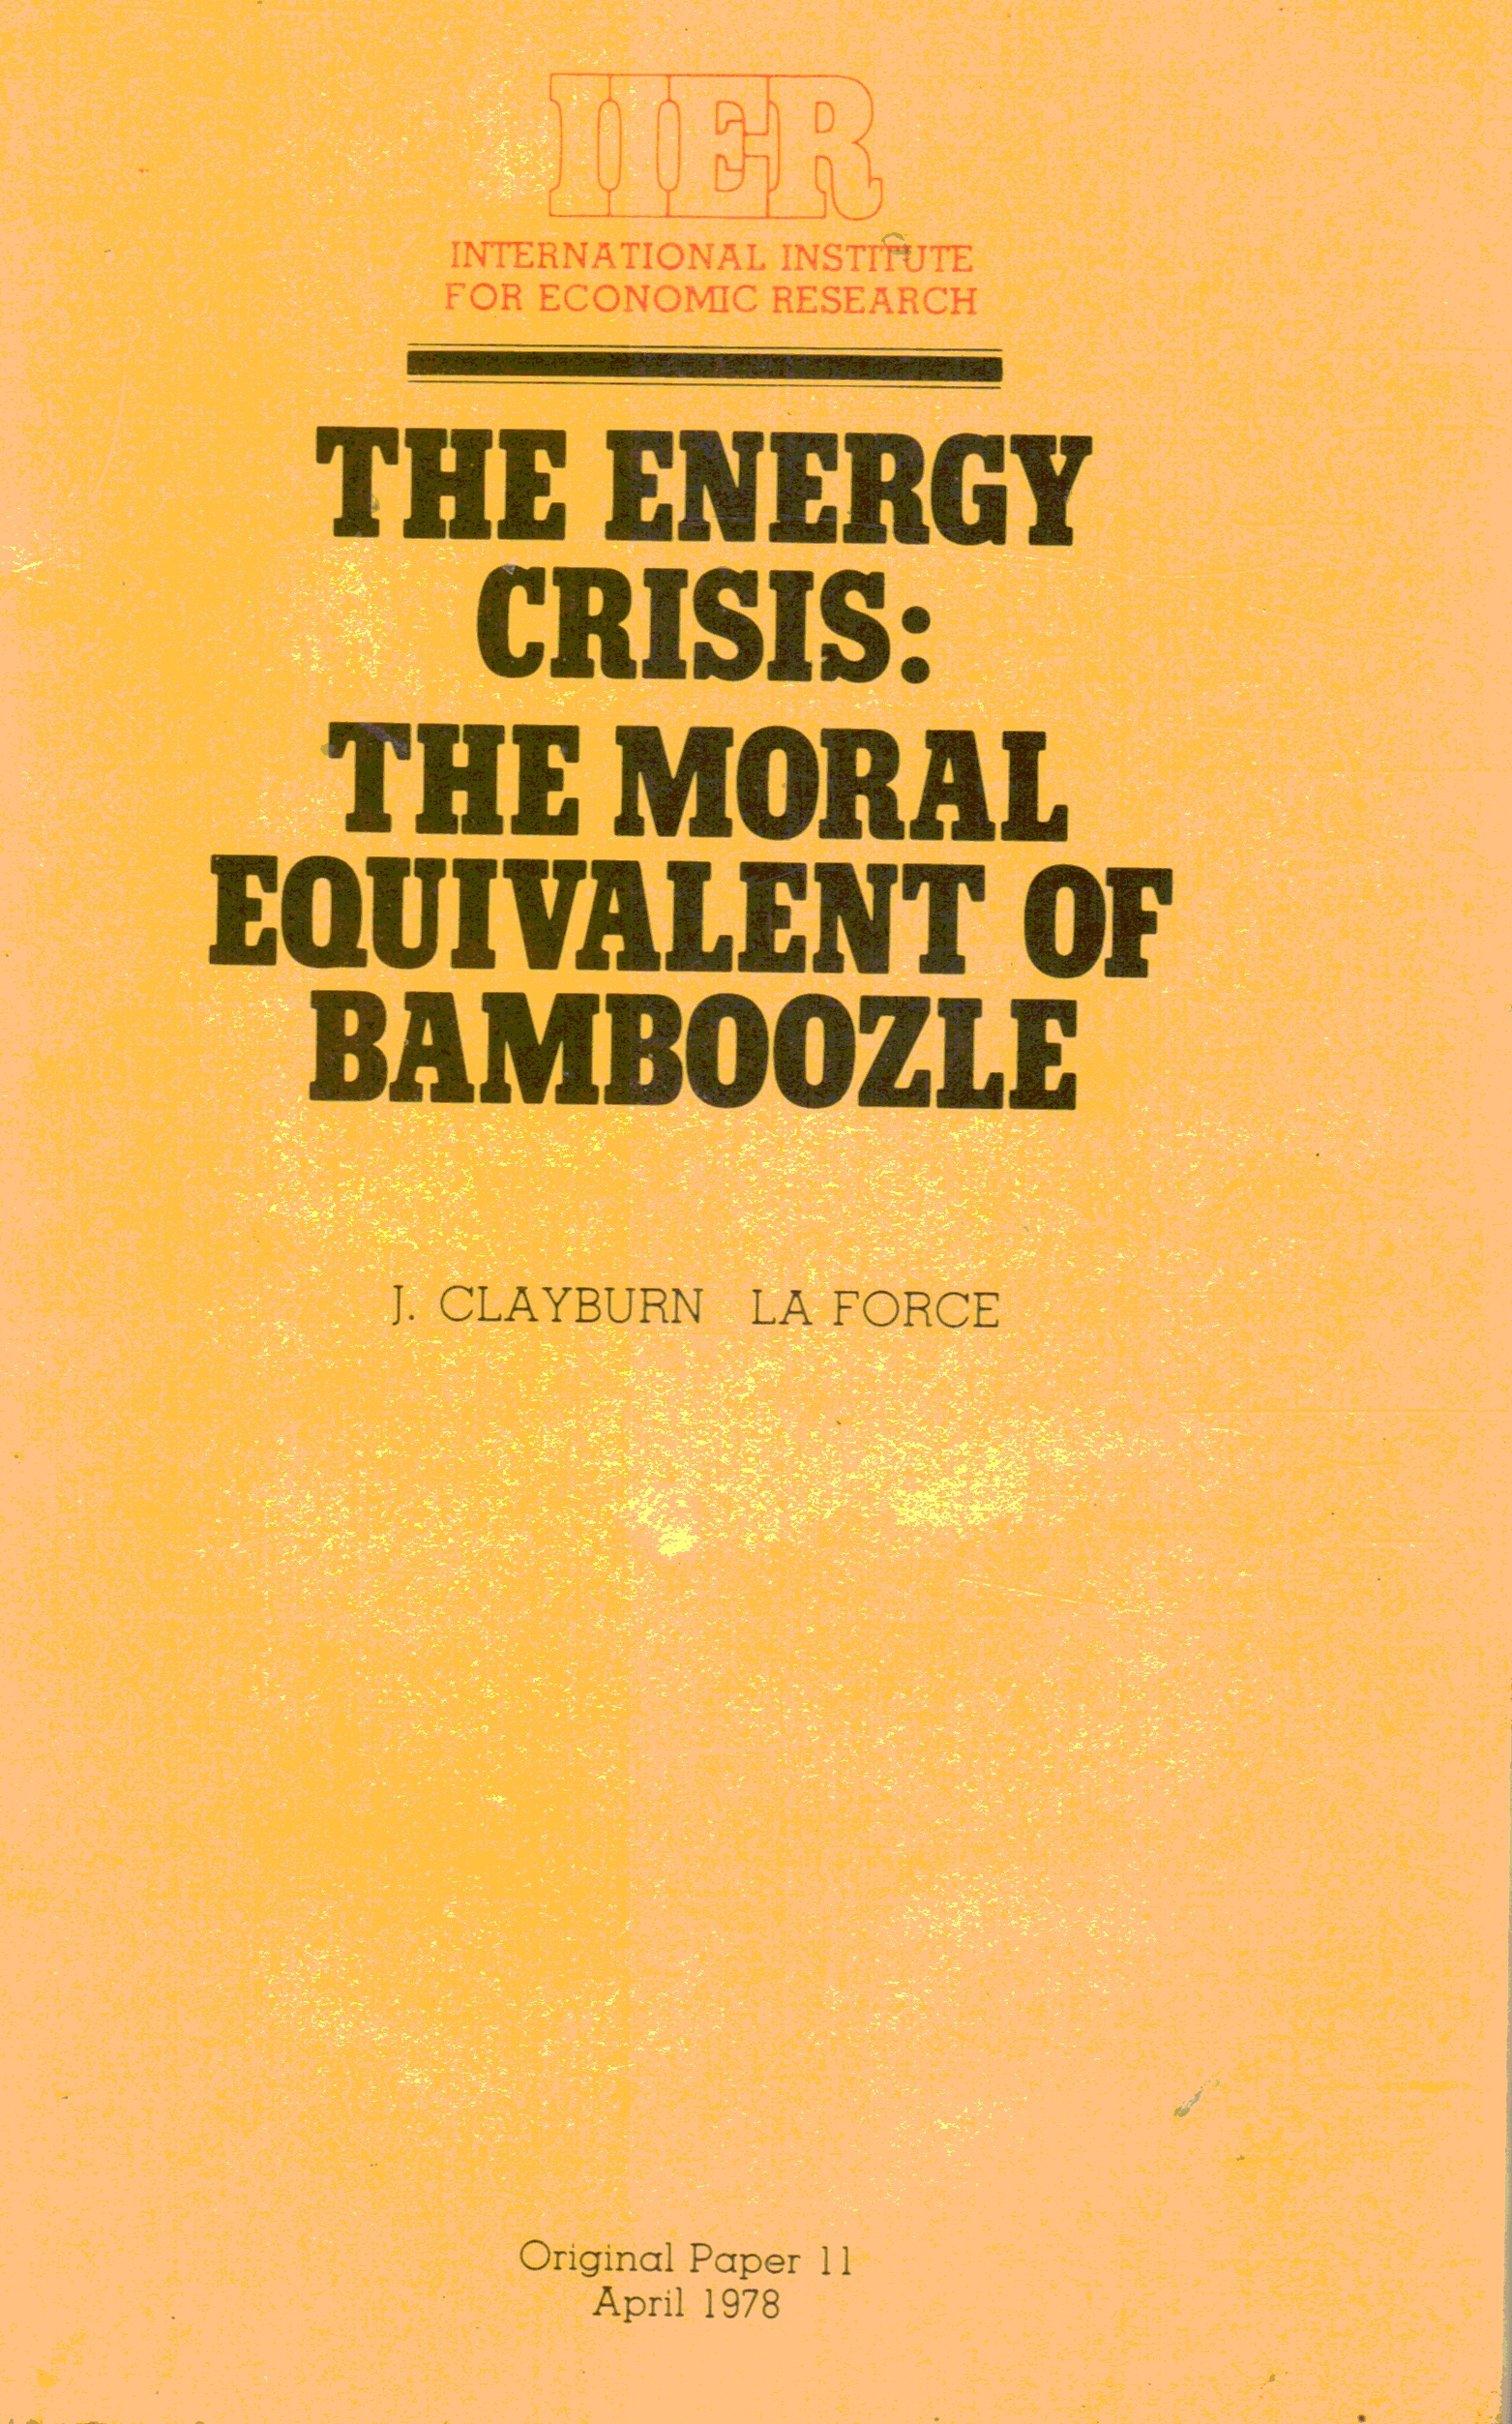 J. CLAYBURN LA FORCE - The Energy Crisis: The Moral Equivalent of Bamboozle. Original Paper -